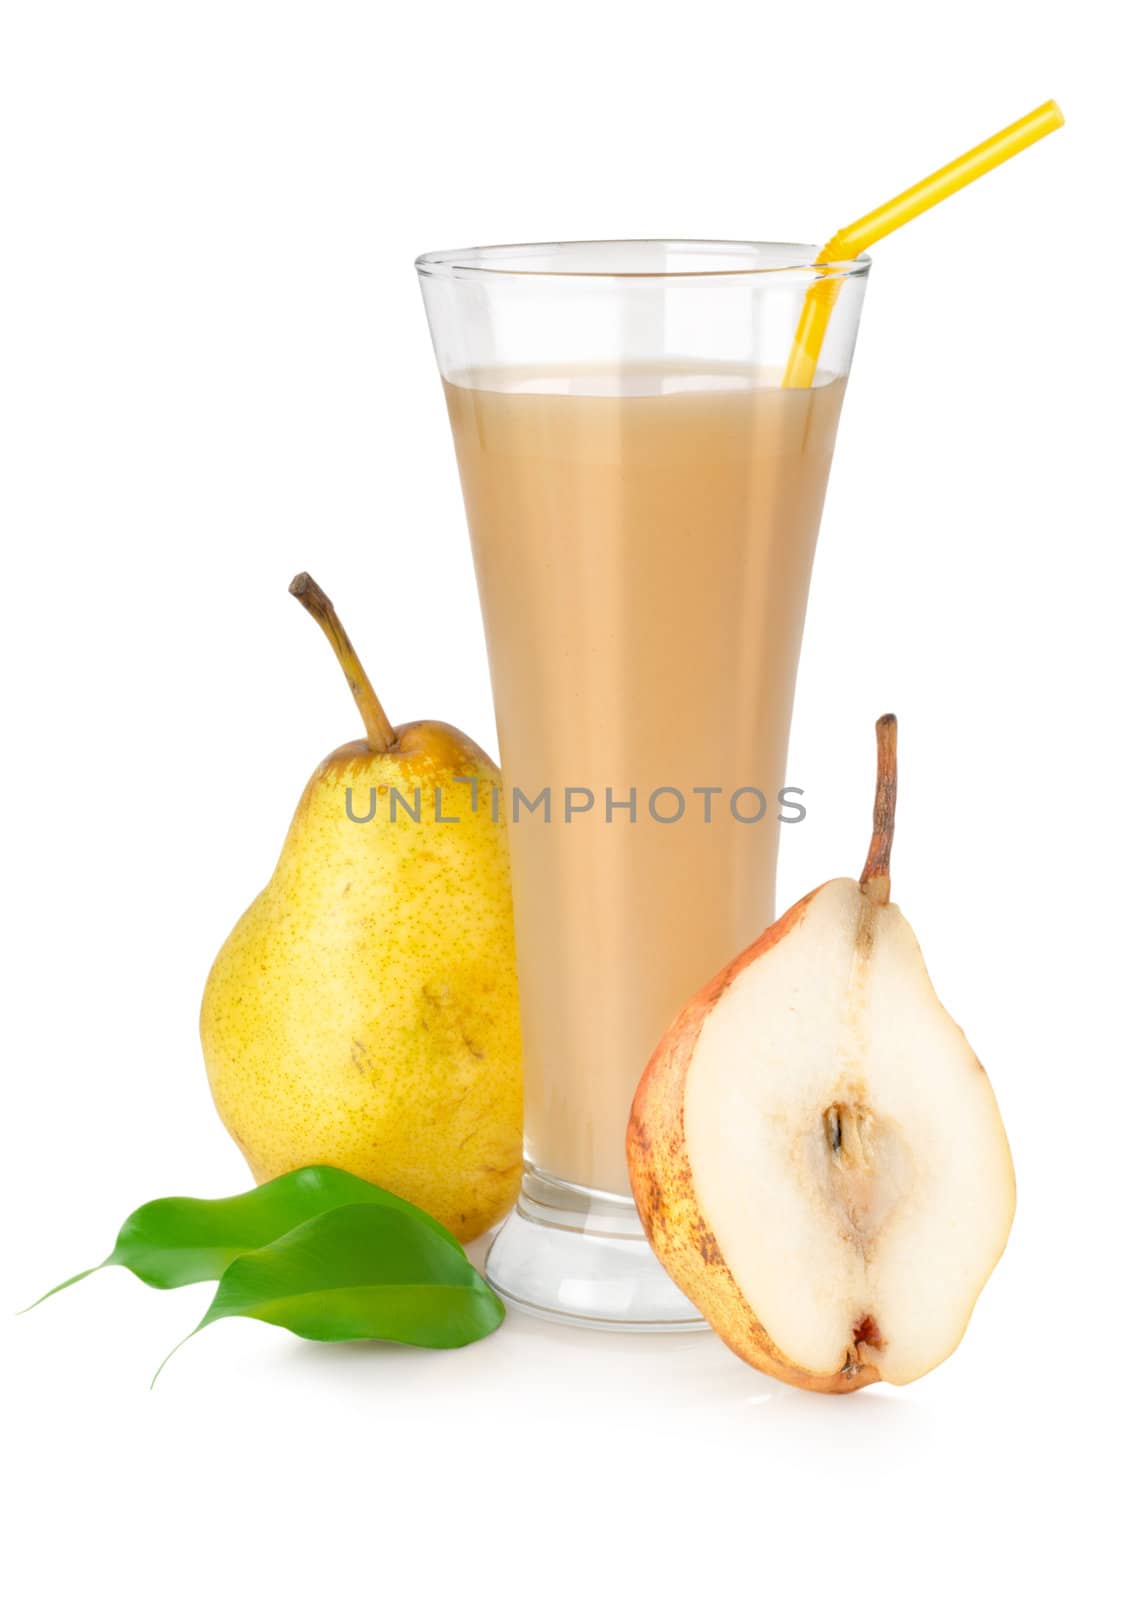 Pear juice by Givaga